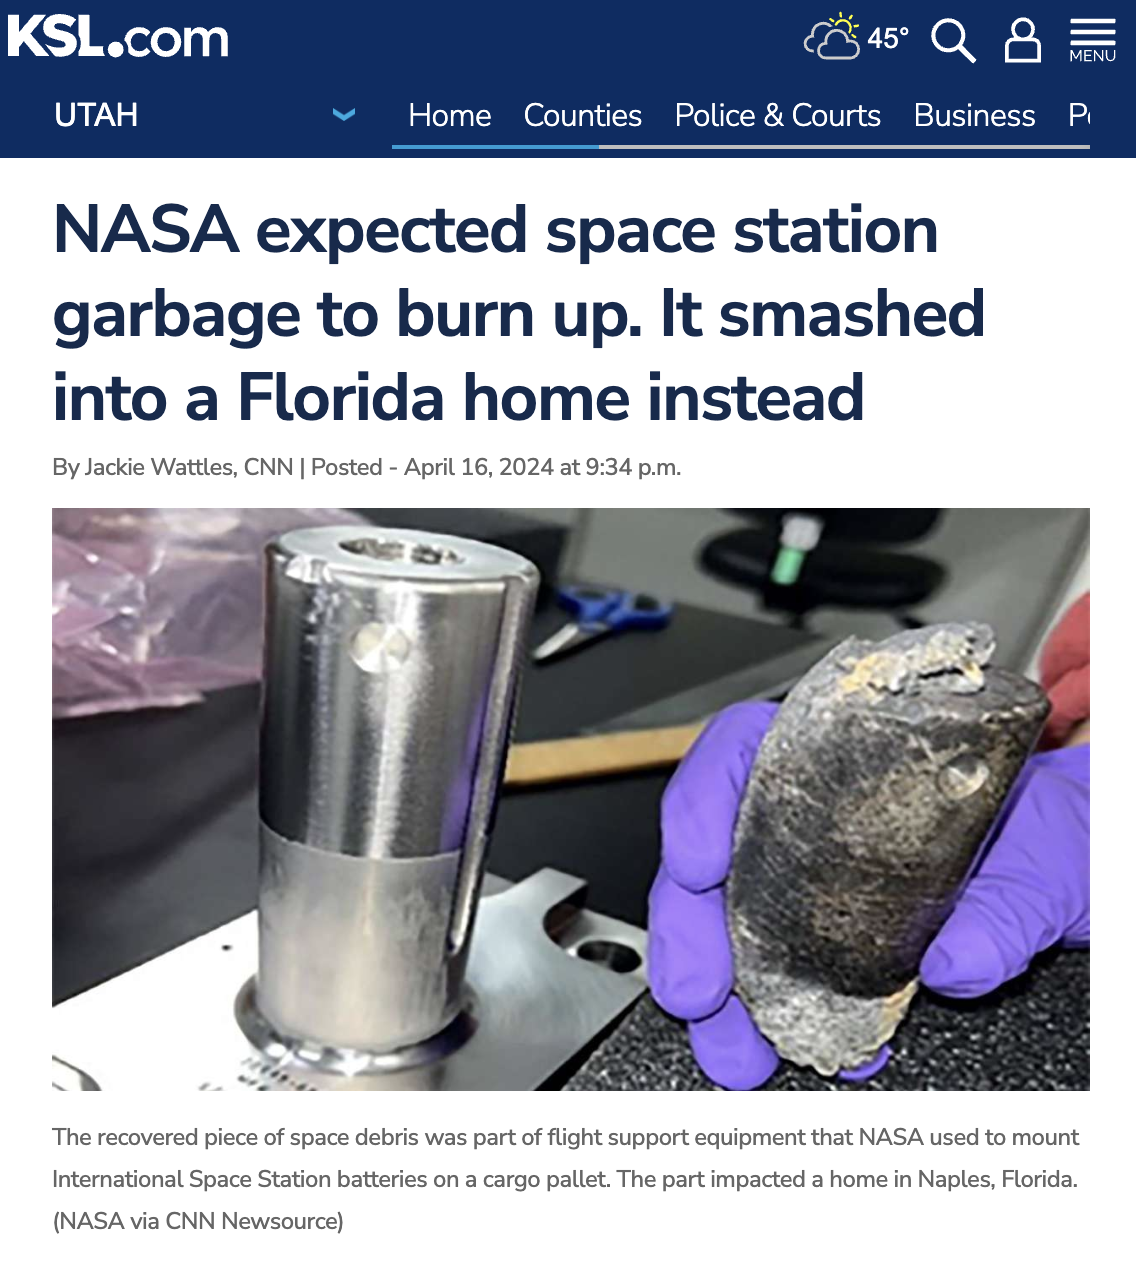 nasa confirms mystery object that crashed through roof of florida home came from space station - Ksl.com Utah 45 8 Home Counties Police & Courts Business P Nasa expected space station garbage to burn up. It smashed into a Florida home instead By Jackie Wa